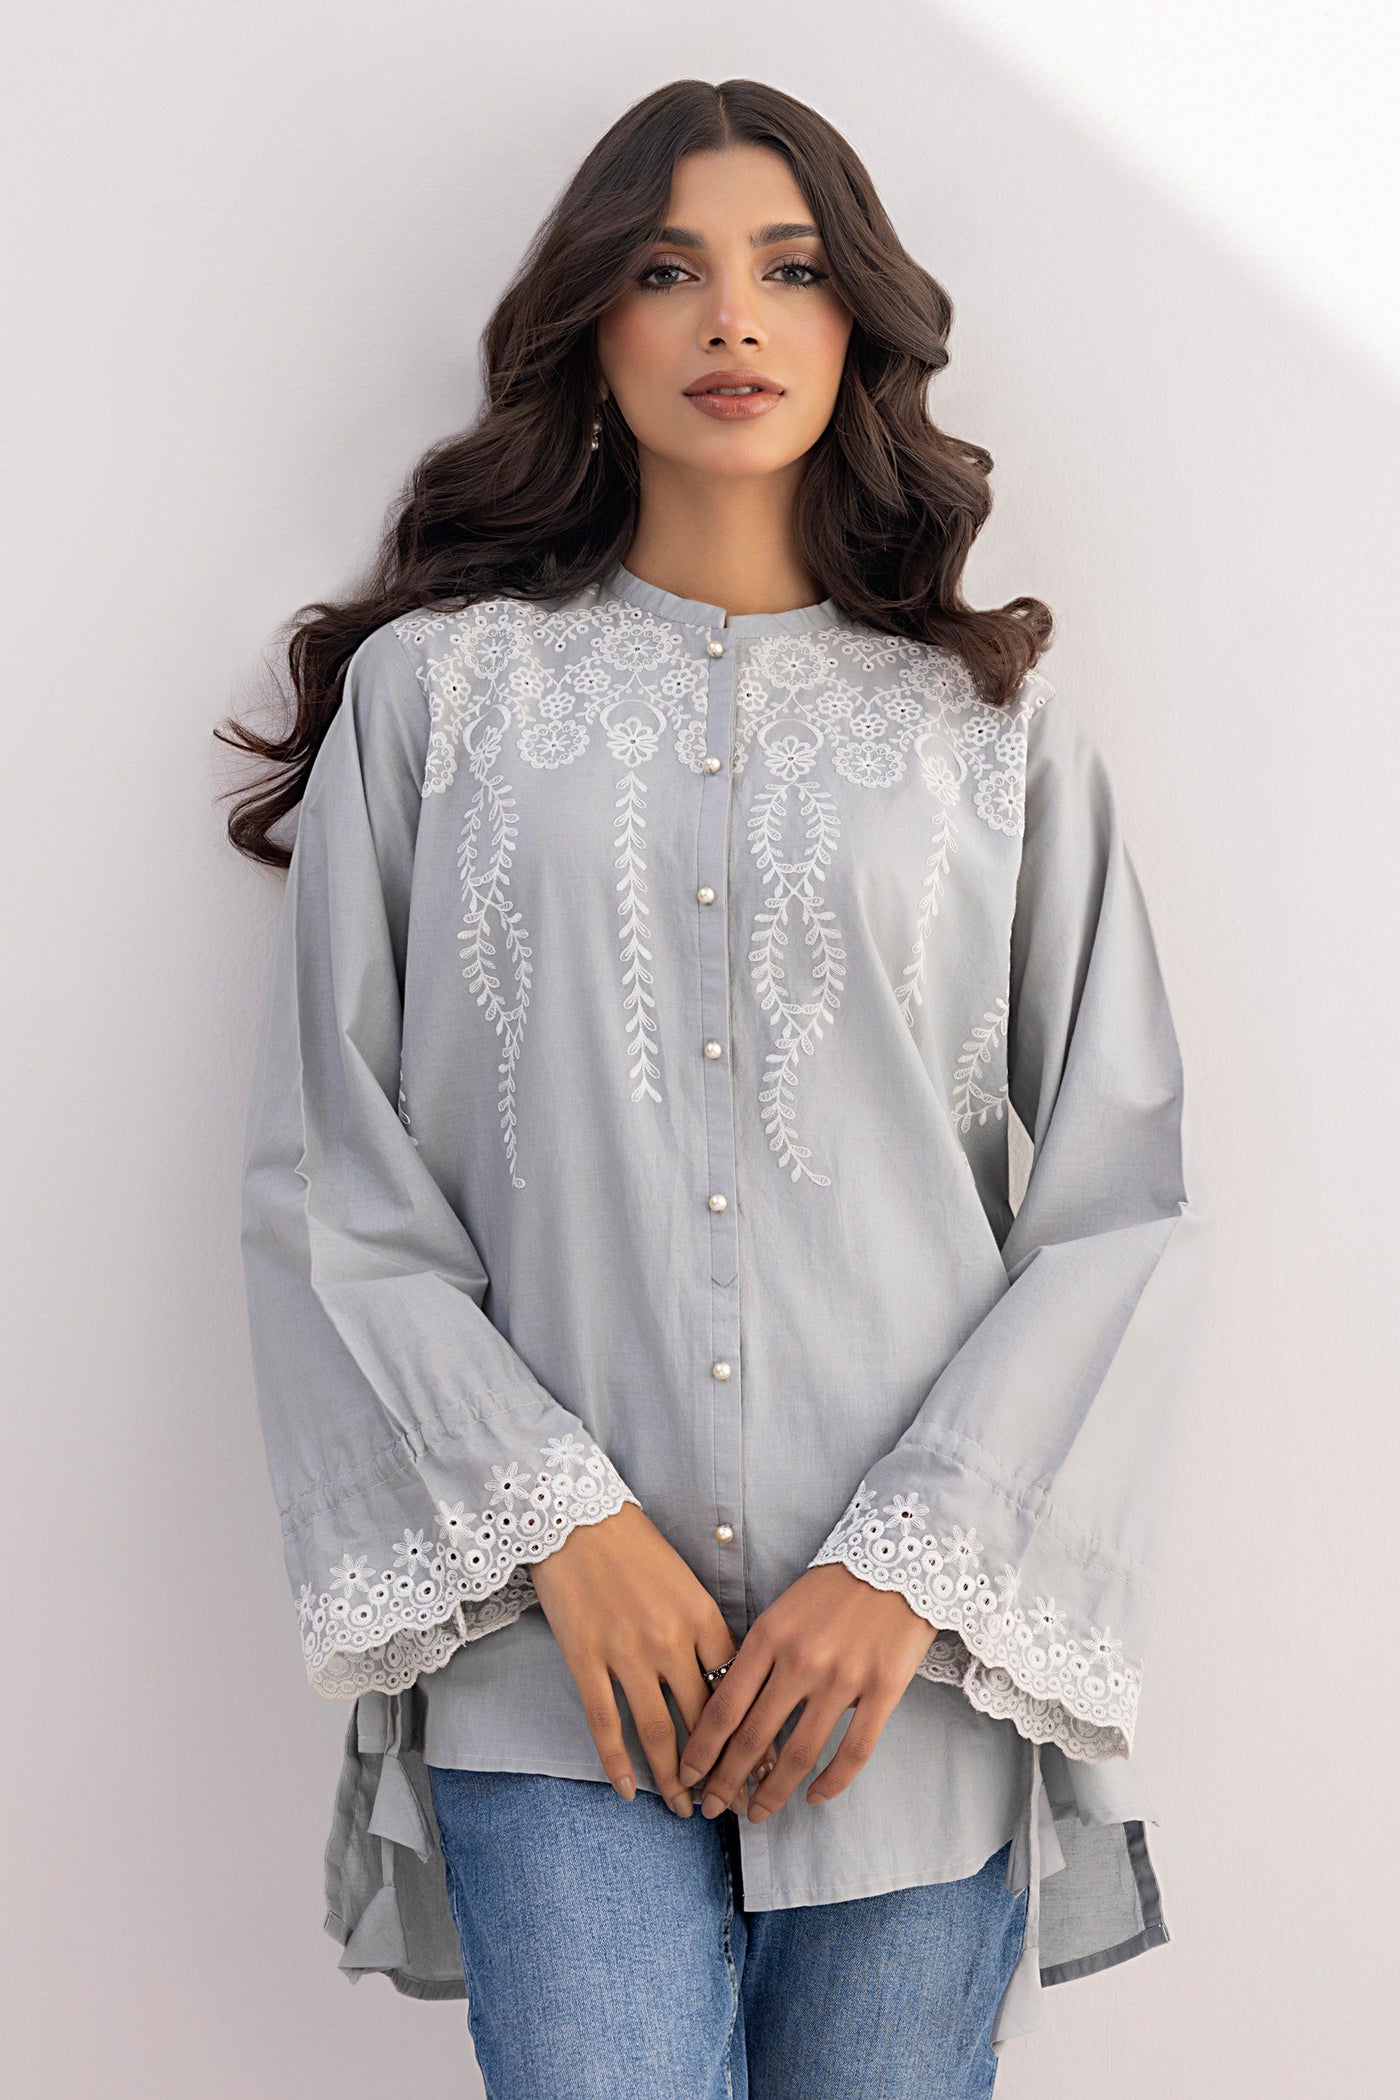 Lakhany 01 Piece Ready to Wear Dyed Embroidered Shirt - LG-SK-0163